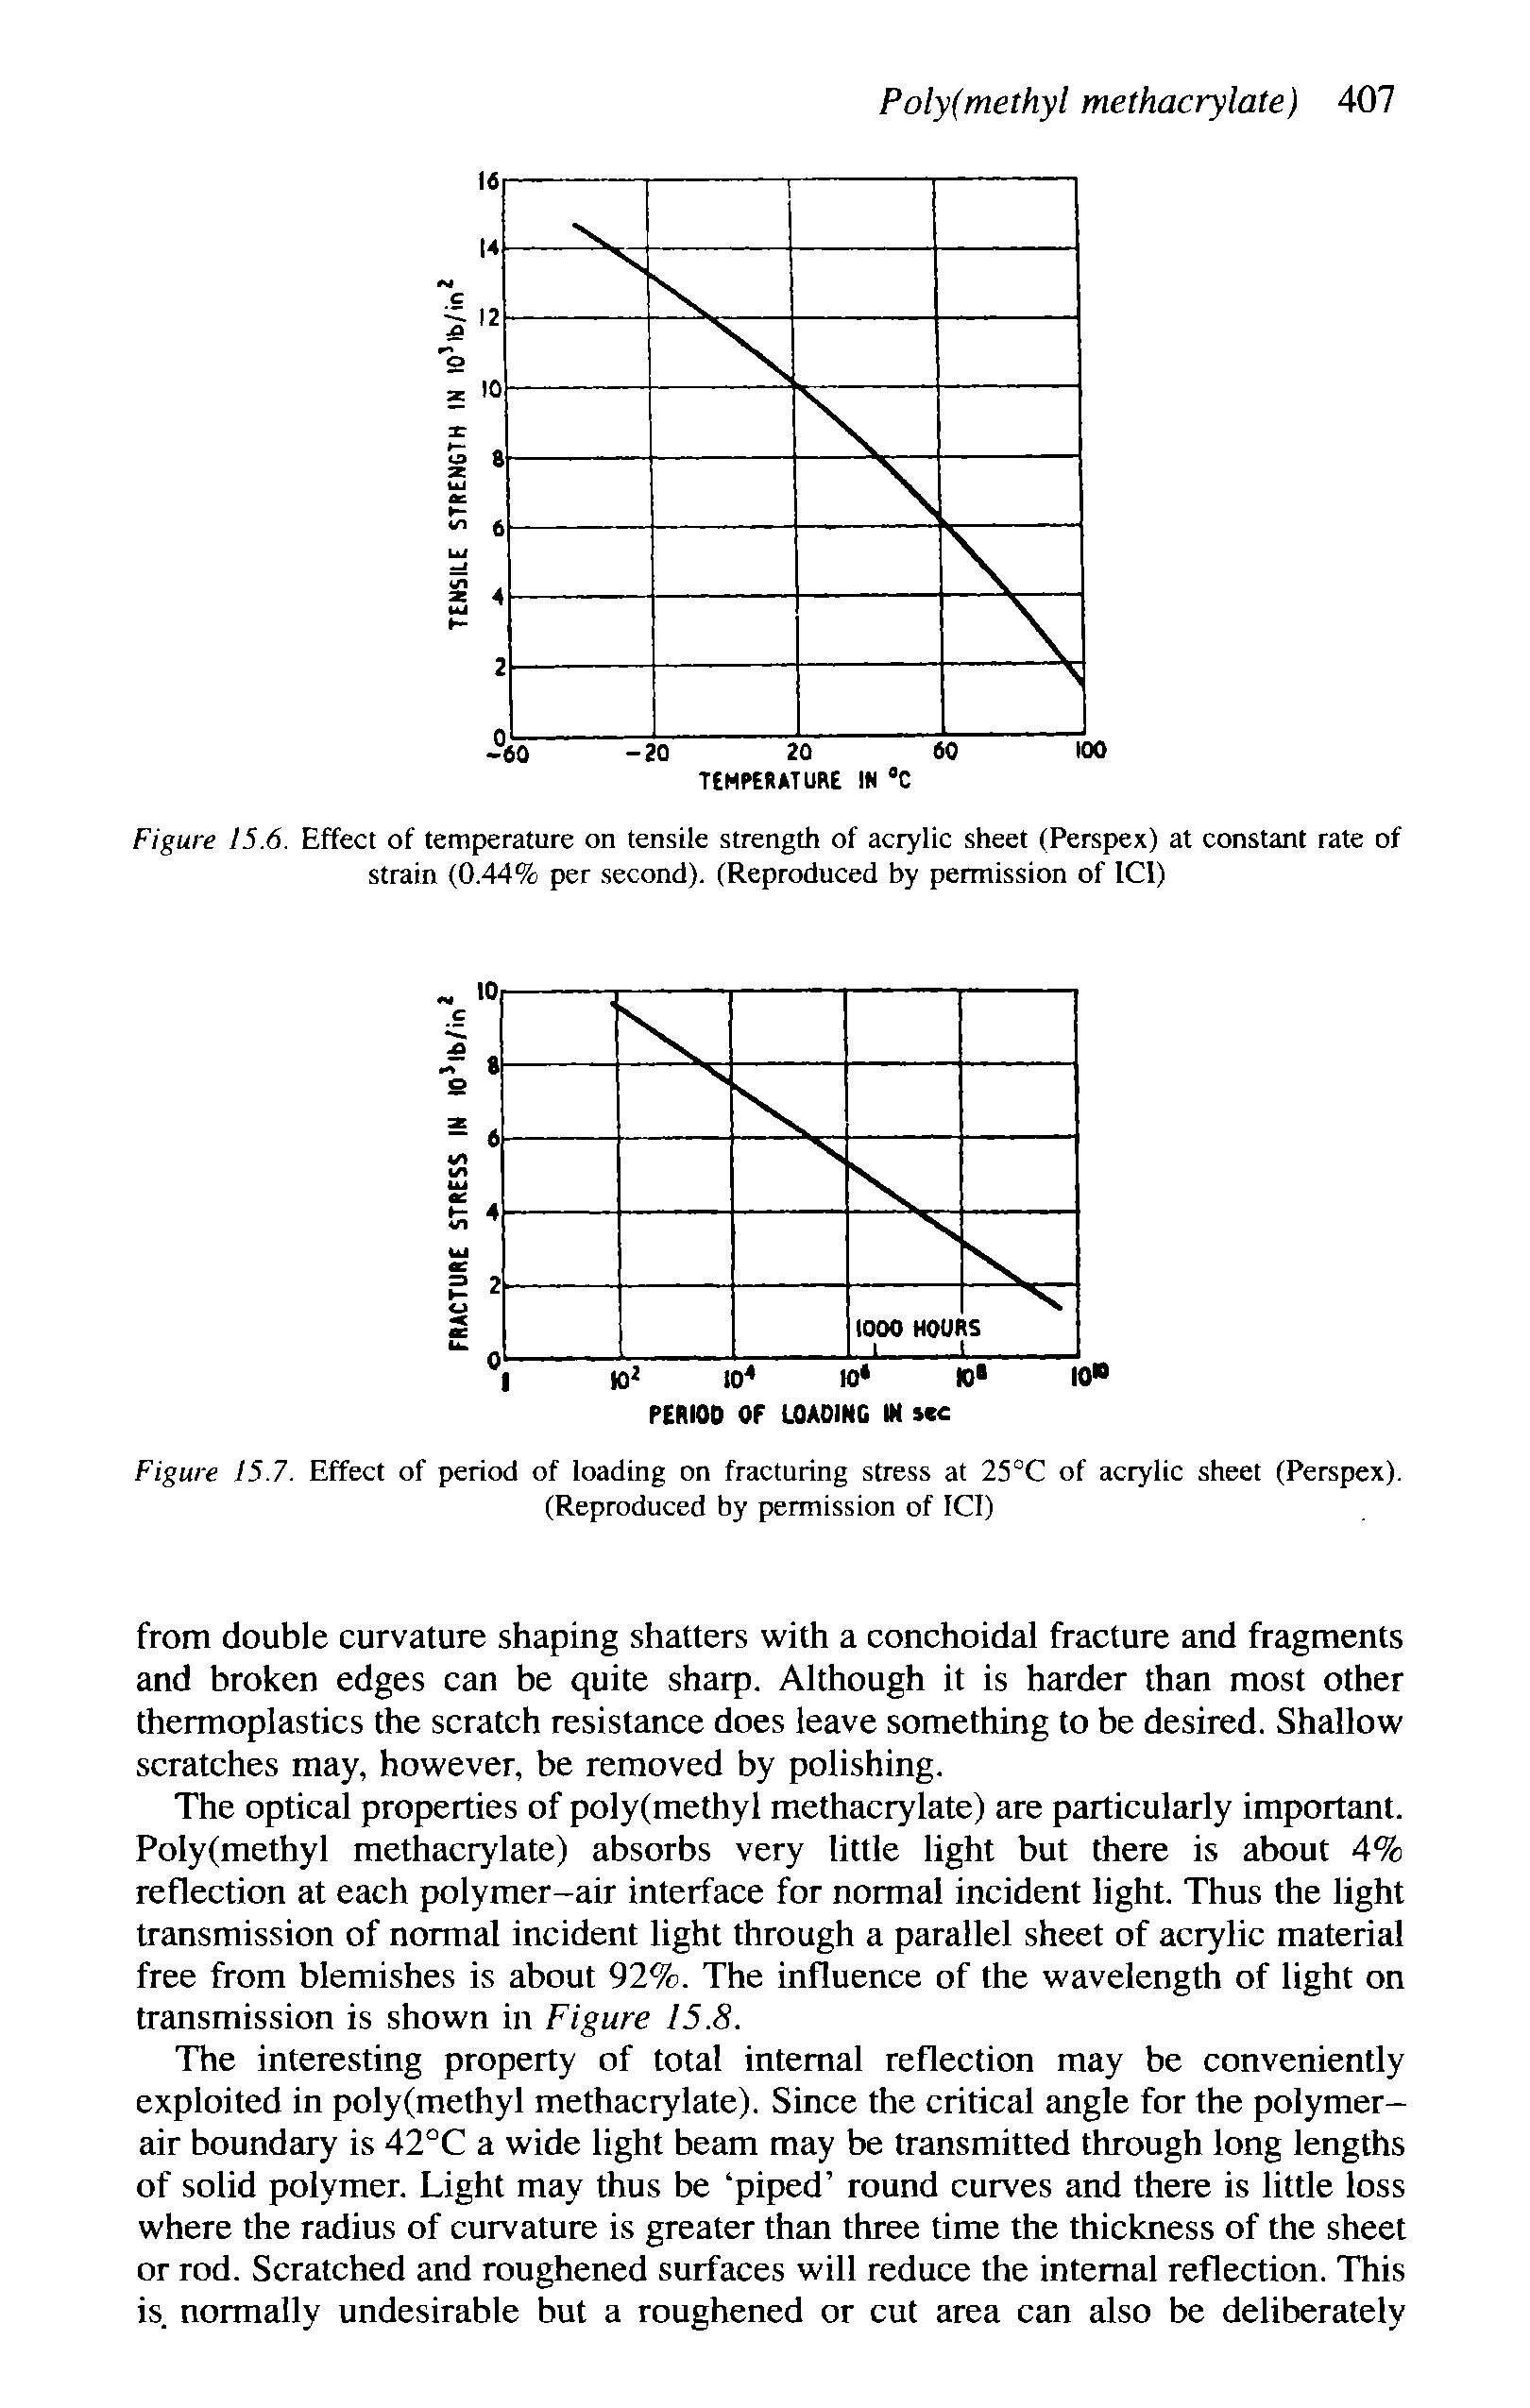 Figure 15.6. Effect of temperature on tensile strength of acrylic sheet (Perspex) at constant rate of strain (0.44% per second). (Reproduced by permission of ICl)...